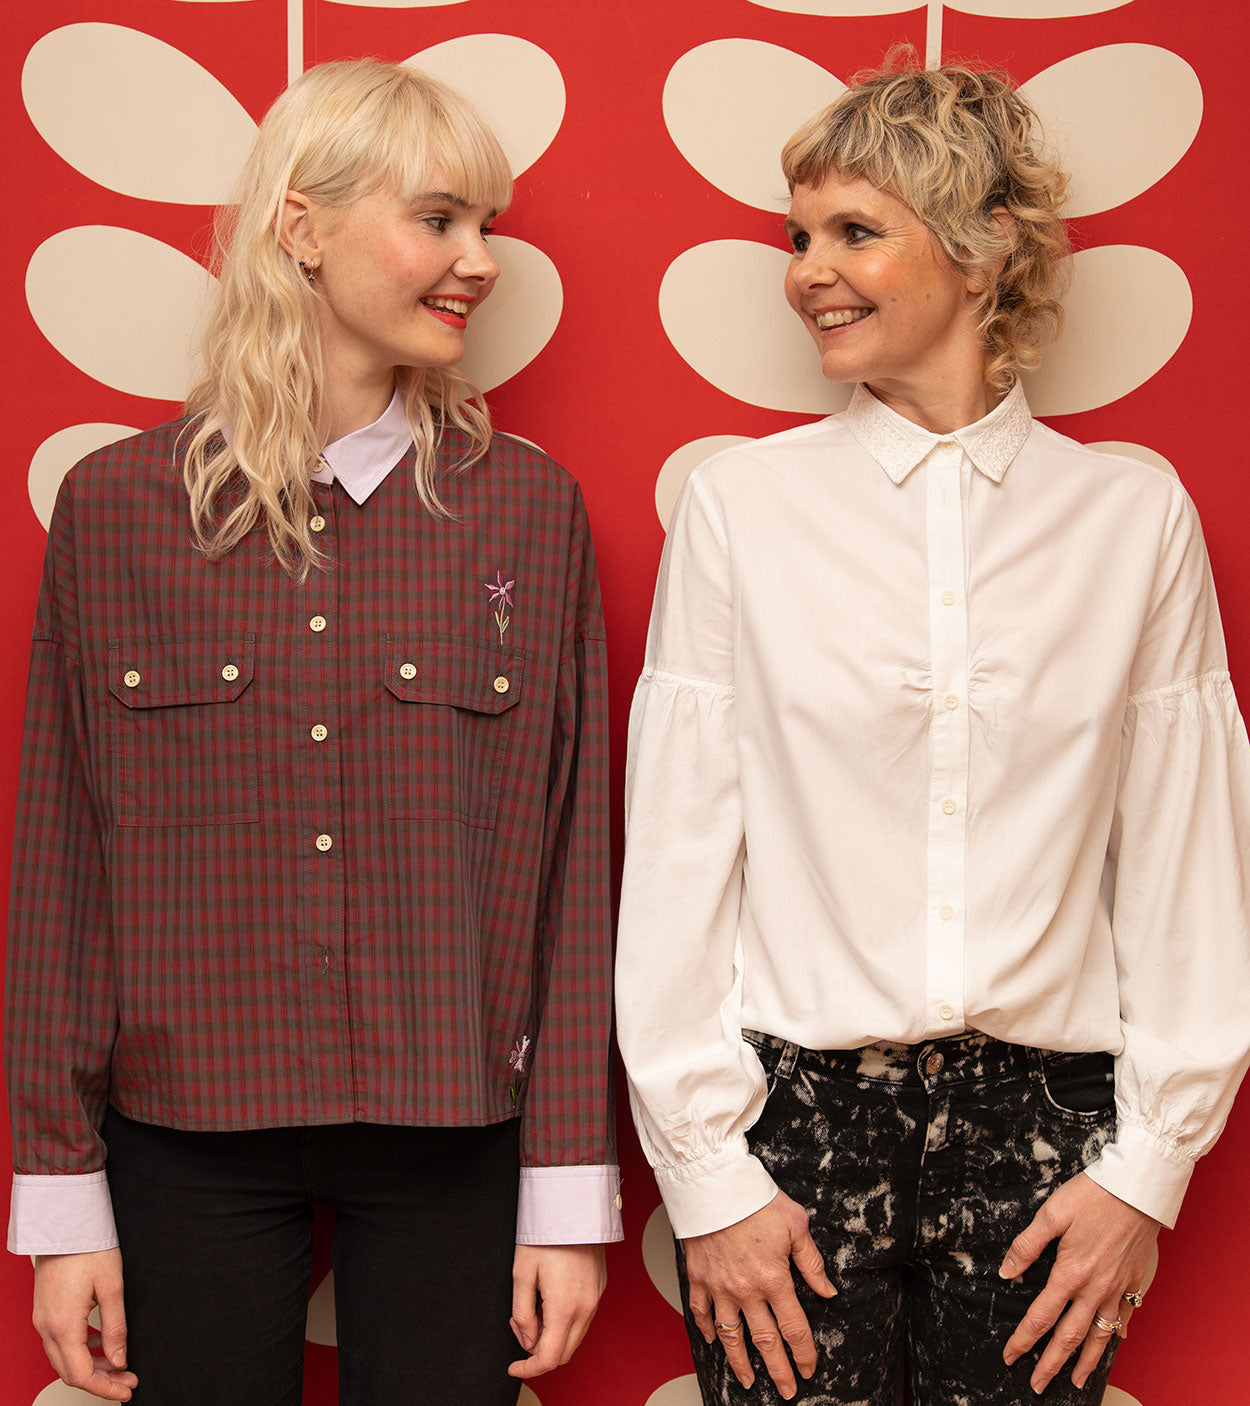 A mum and her daughter stand side by side, smiling at each other. The mum is wearing Saywood's white Edi Volume Sleeve Shirt with lace collar, and the daughter is wearing Saywood's Jules Utility Shirt in micro red check with lilac collar. A red and white wallpaper is in the background.